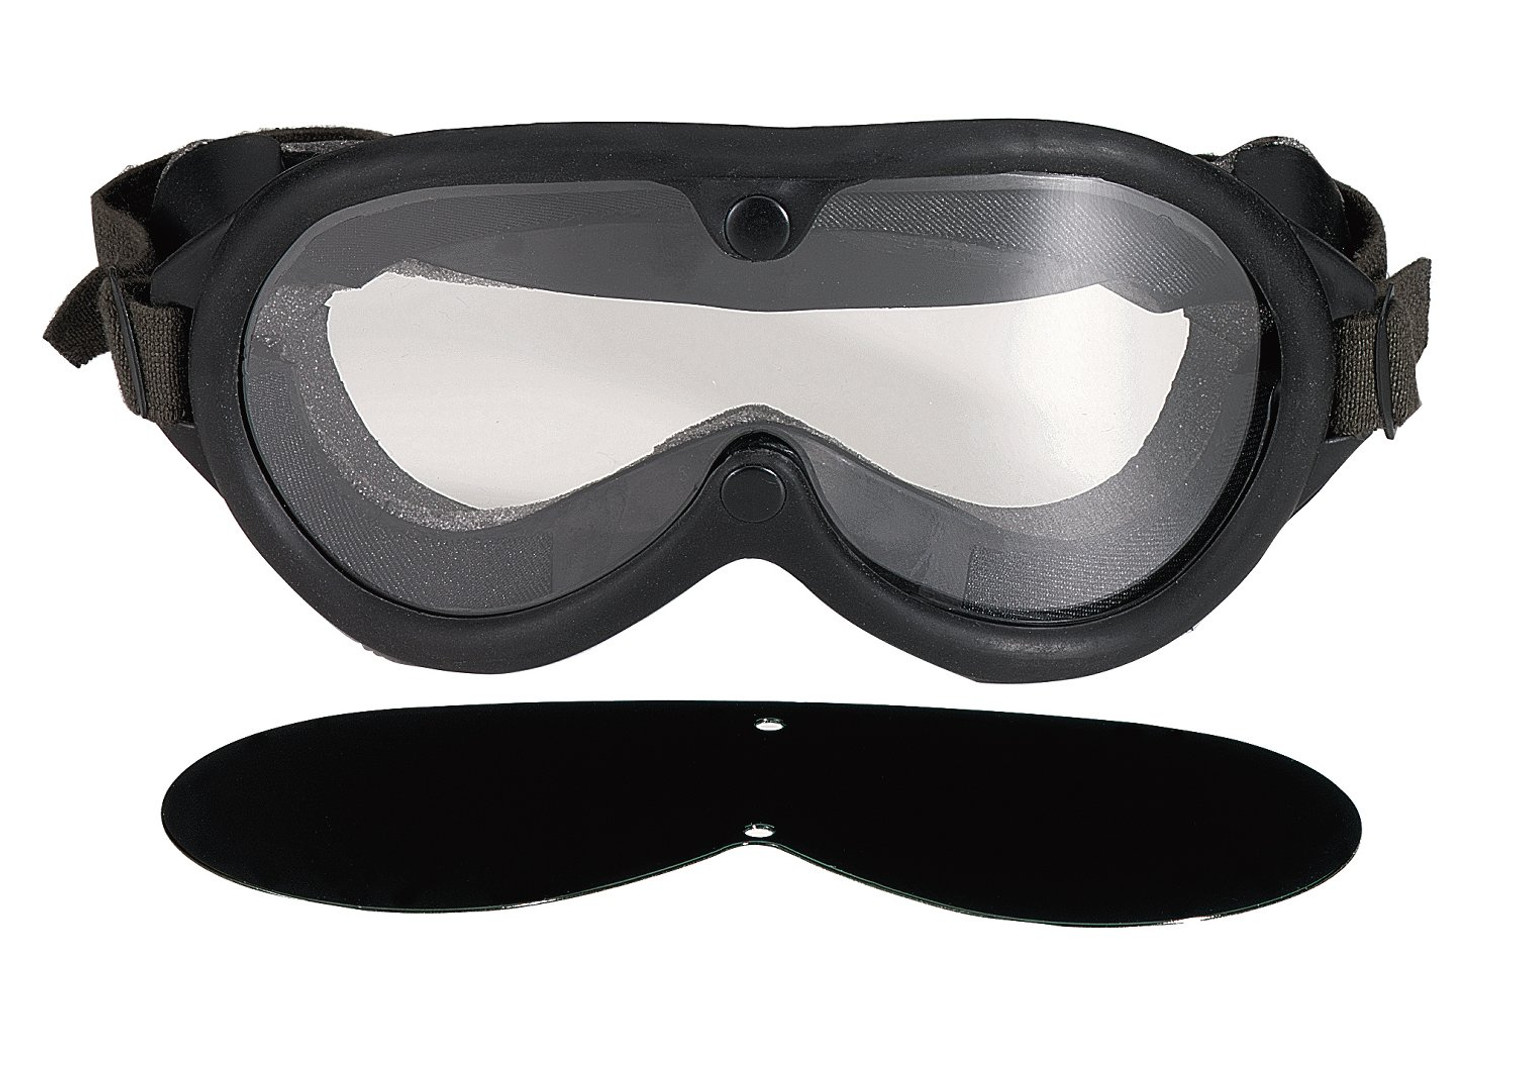 Rothco G.I. Type Sun, Wind & Dust Goggles